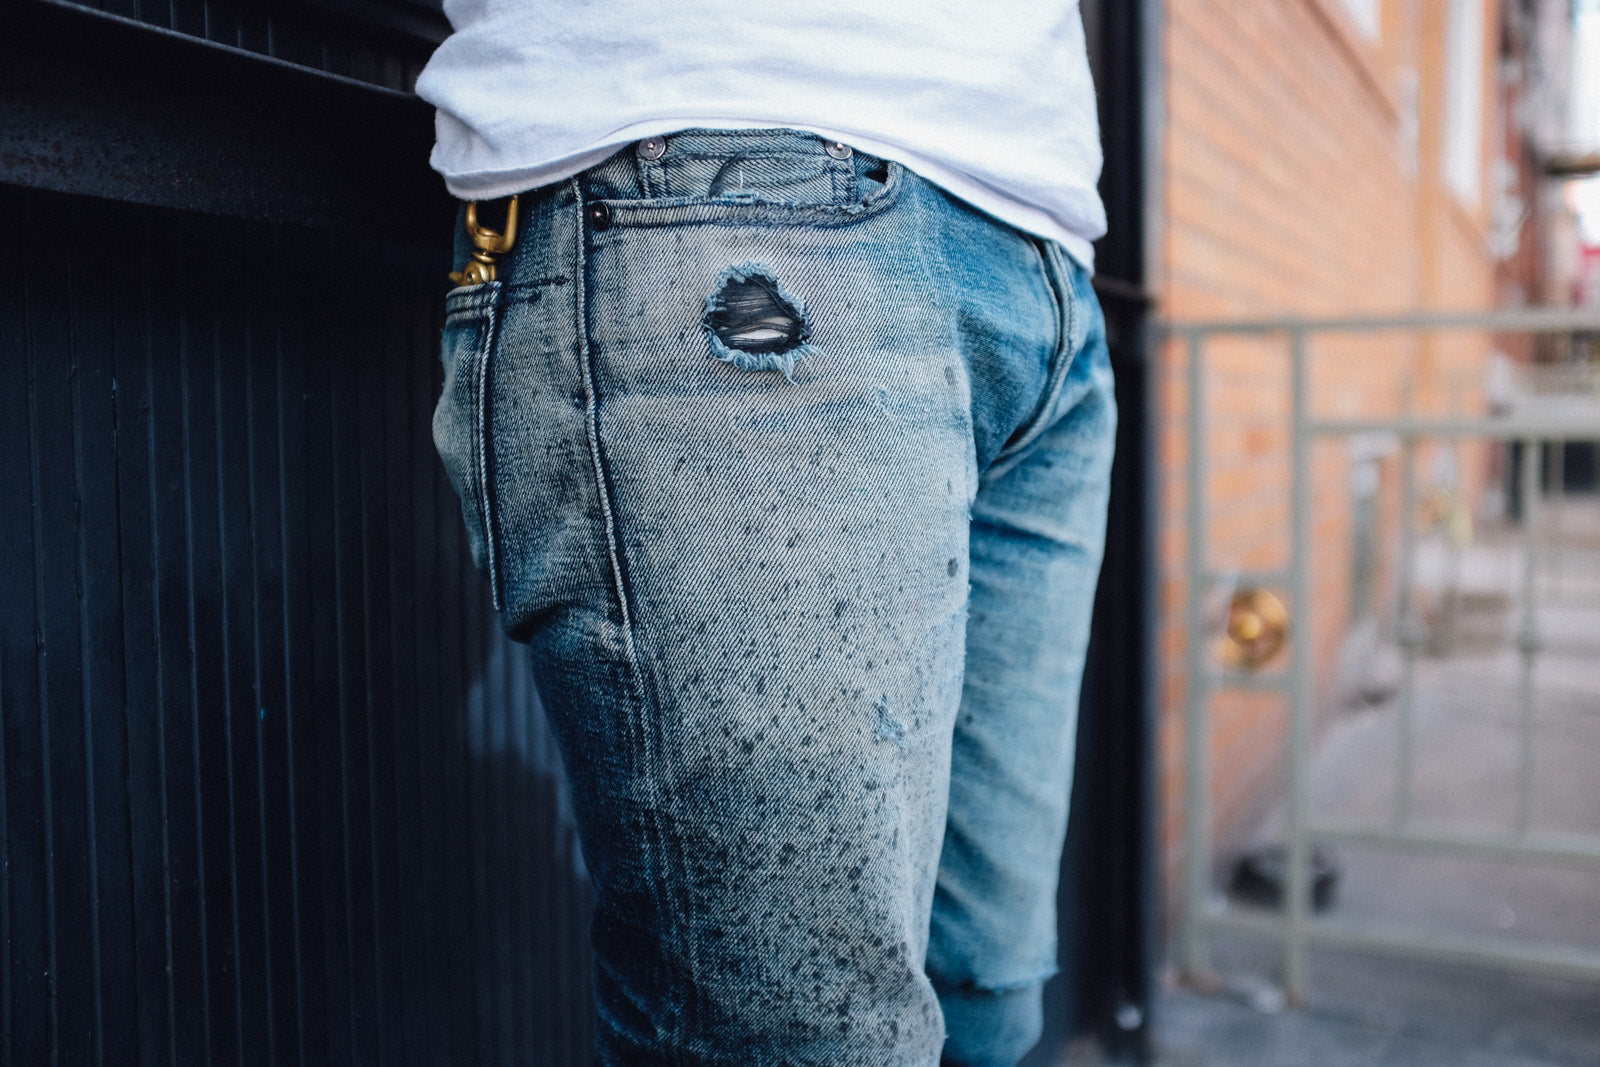 An up close photo of a splattered and faded pair of jeans.